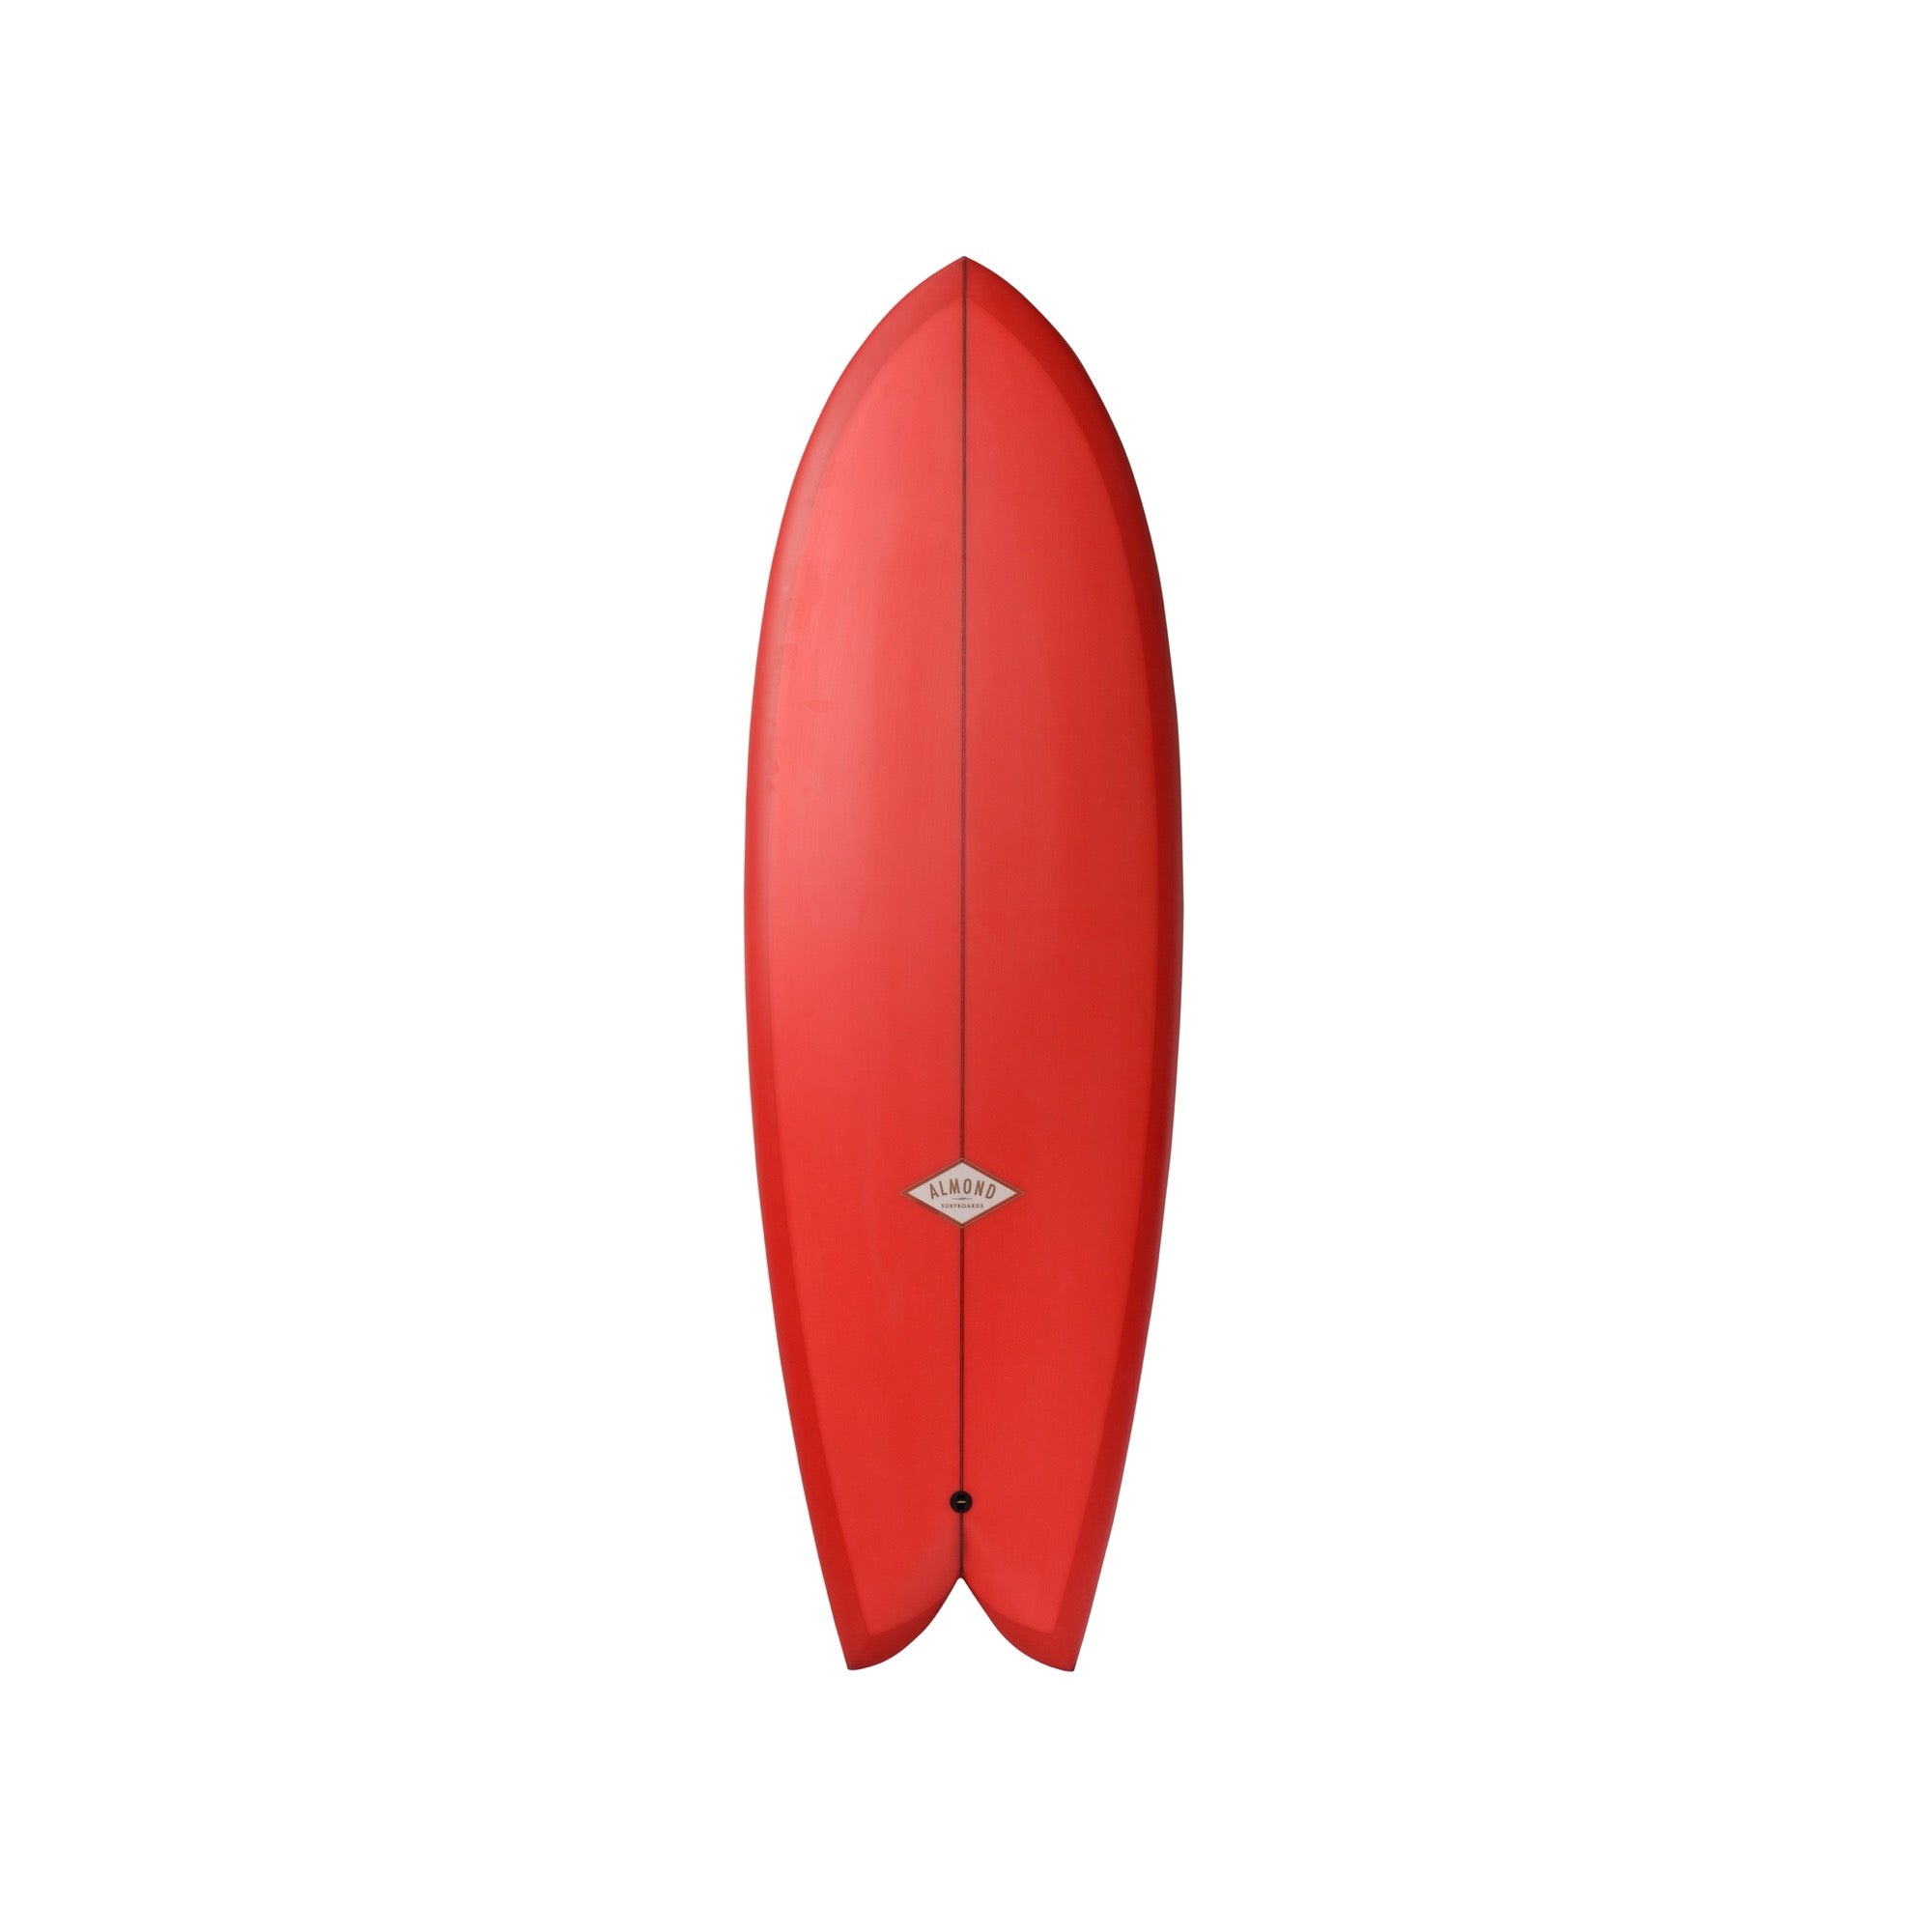 ALMOND - Special Recipe Fish 5'6 (PU) - Red Tint